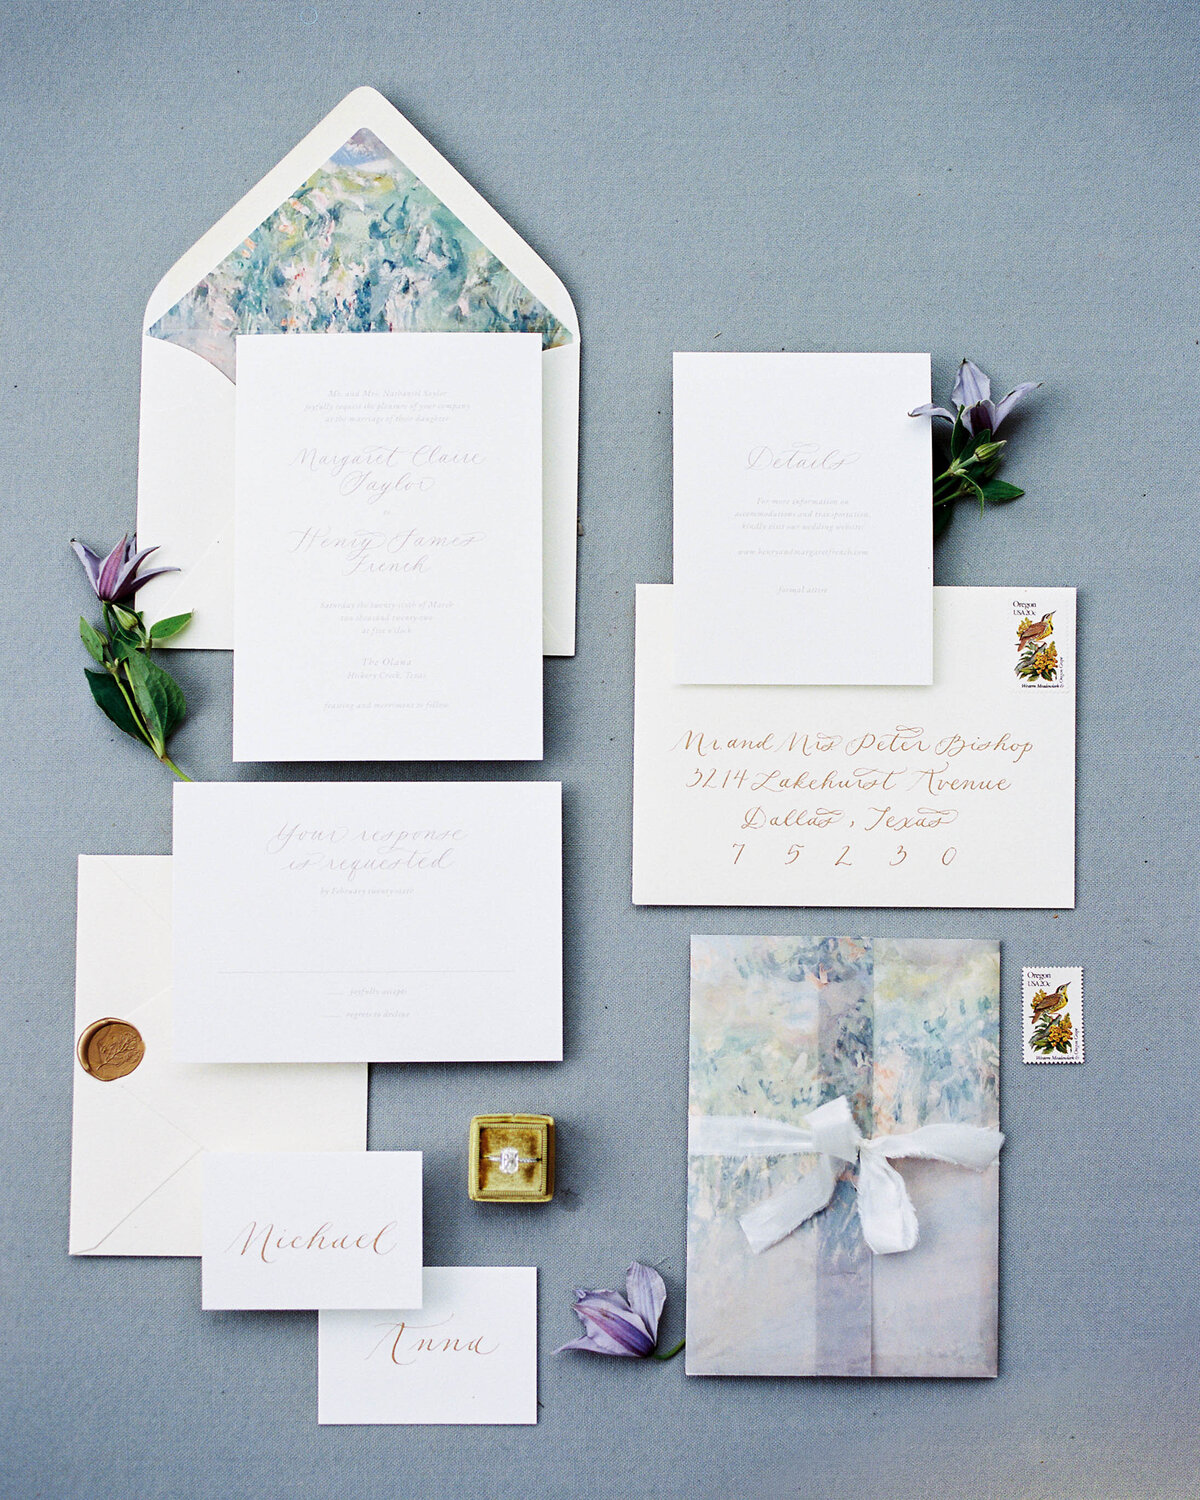 A classic blue flatlay image of a custom invitation suite for a wedding.